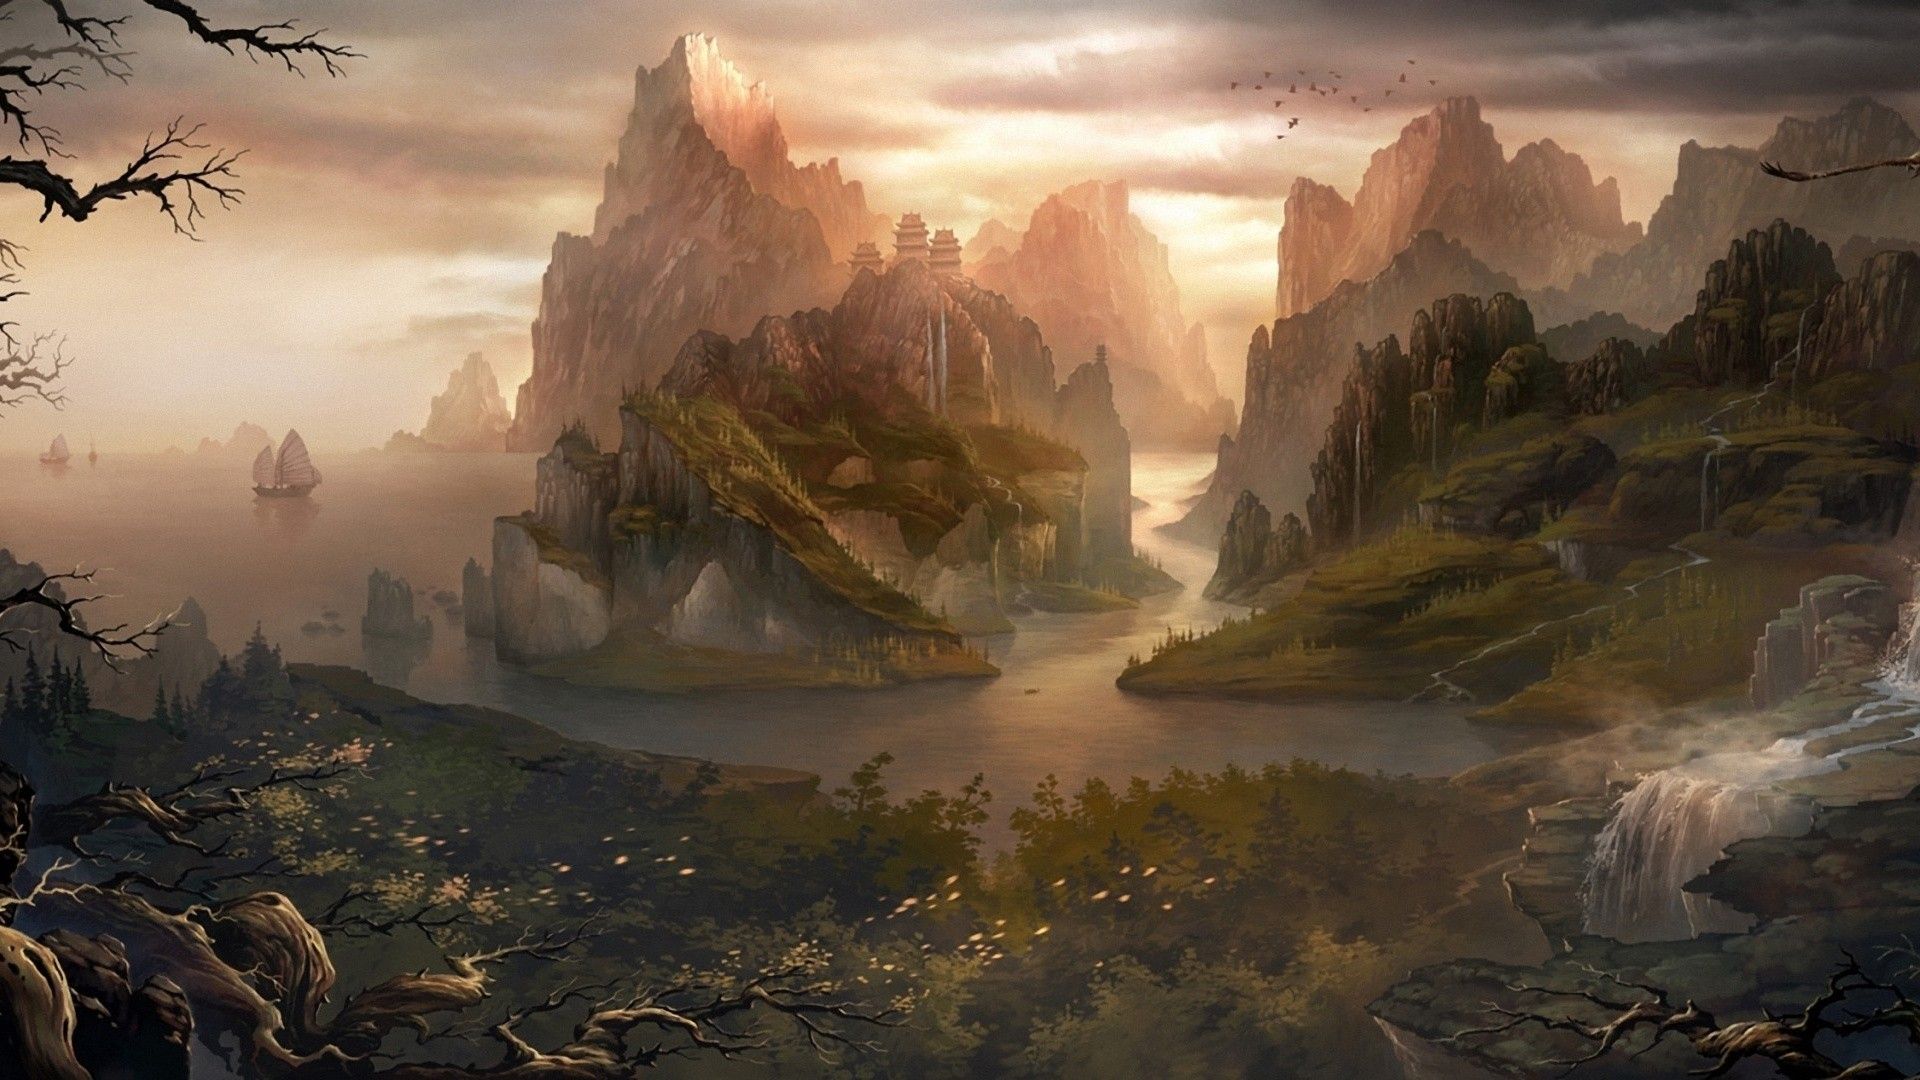 Cool Mountain Fantasy Art Wallpapers Wallpaper Cave